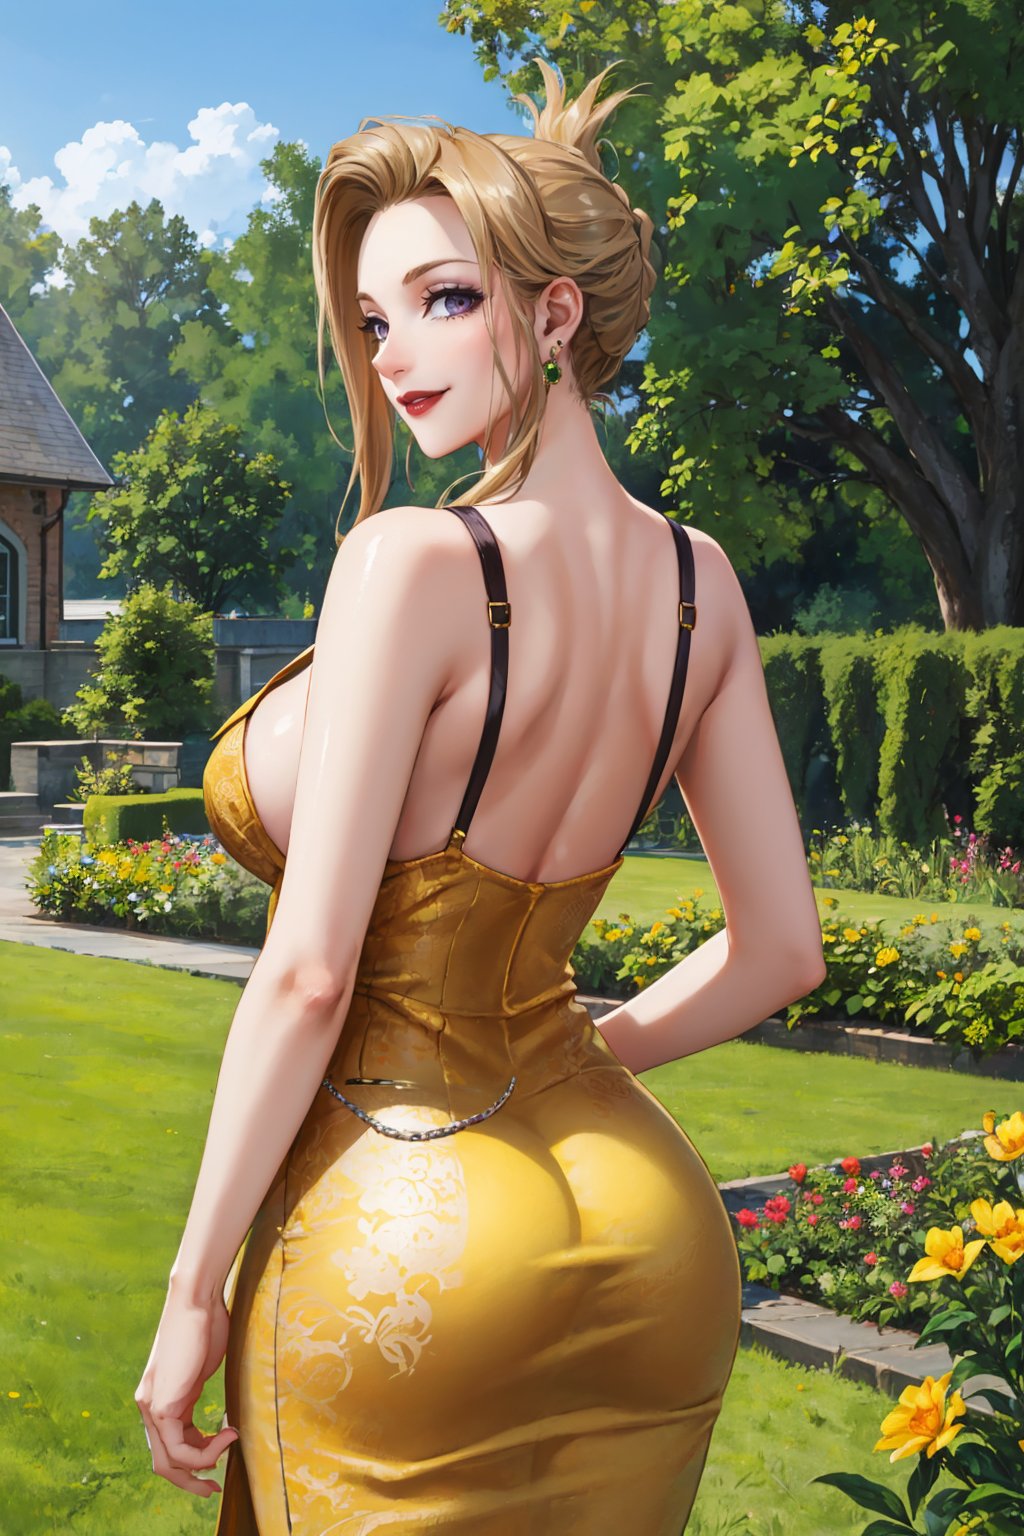 masterpiece, best quality, <lora:ffscarlet-nvwls-v1-000009:0.9> ffscarlet, purple eyes, earrings, lipstick, large breasts, (yellow sundress:1.3), from behind, garden, smile